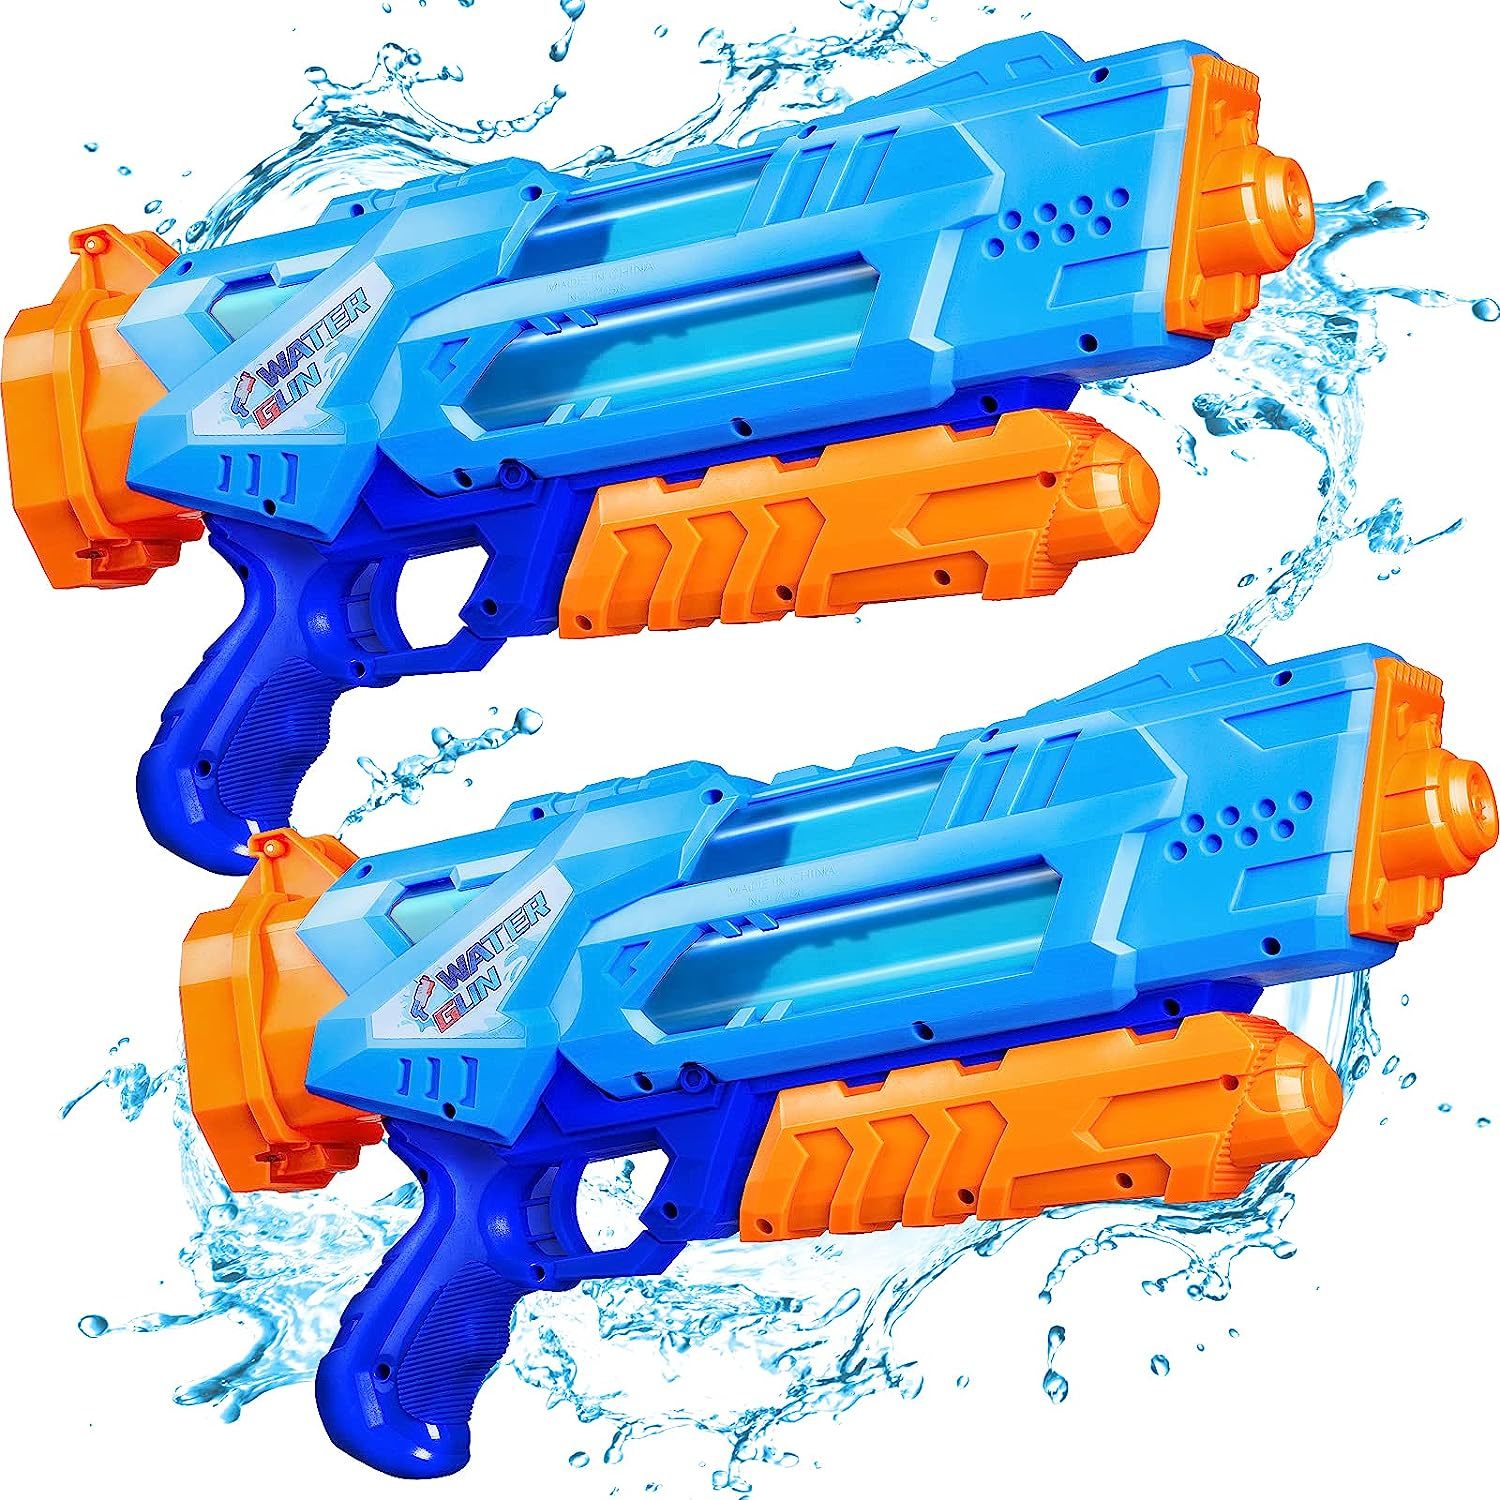 Primary image for Super Water Guns For Kids Adults - 2 Pack Super Water Blaster Soaker Squirt Guns